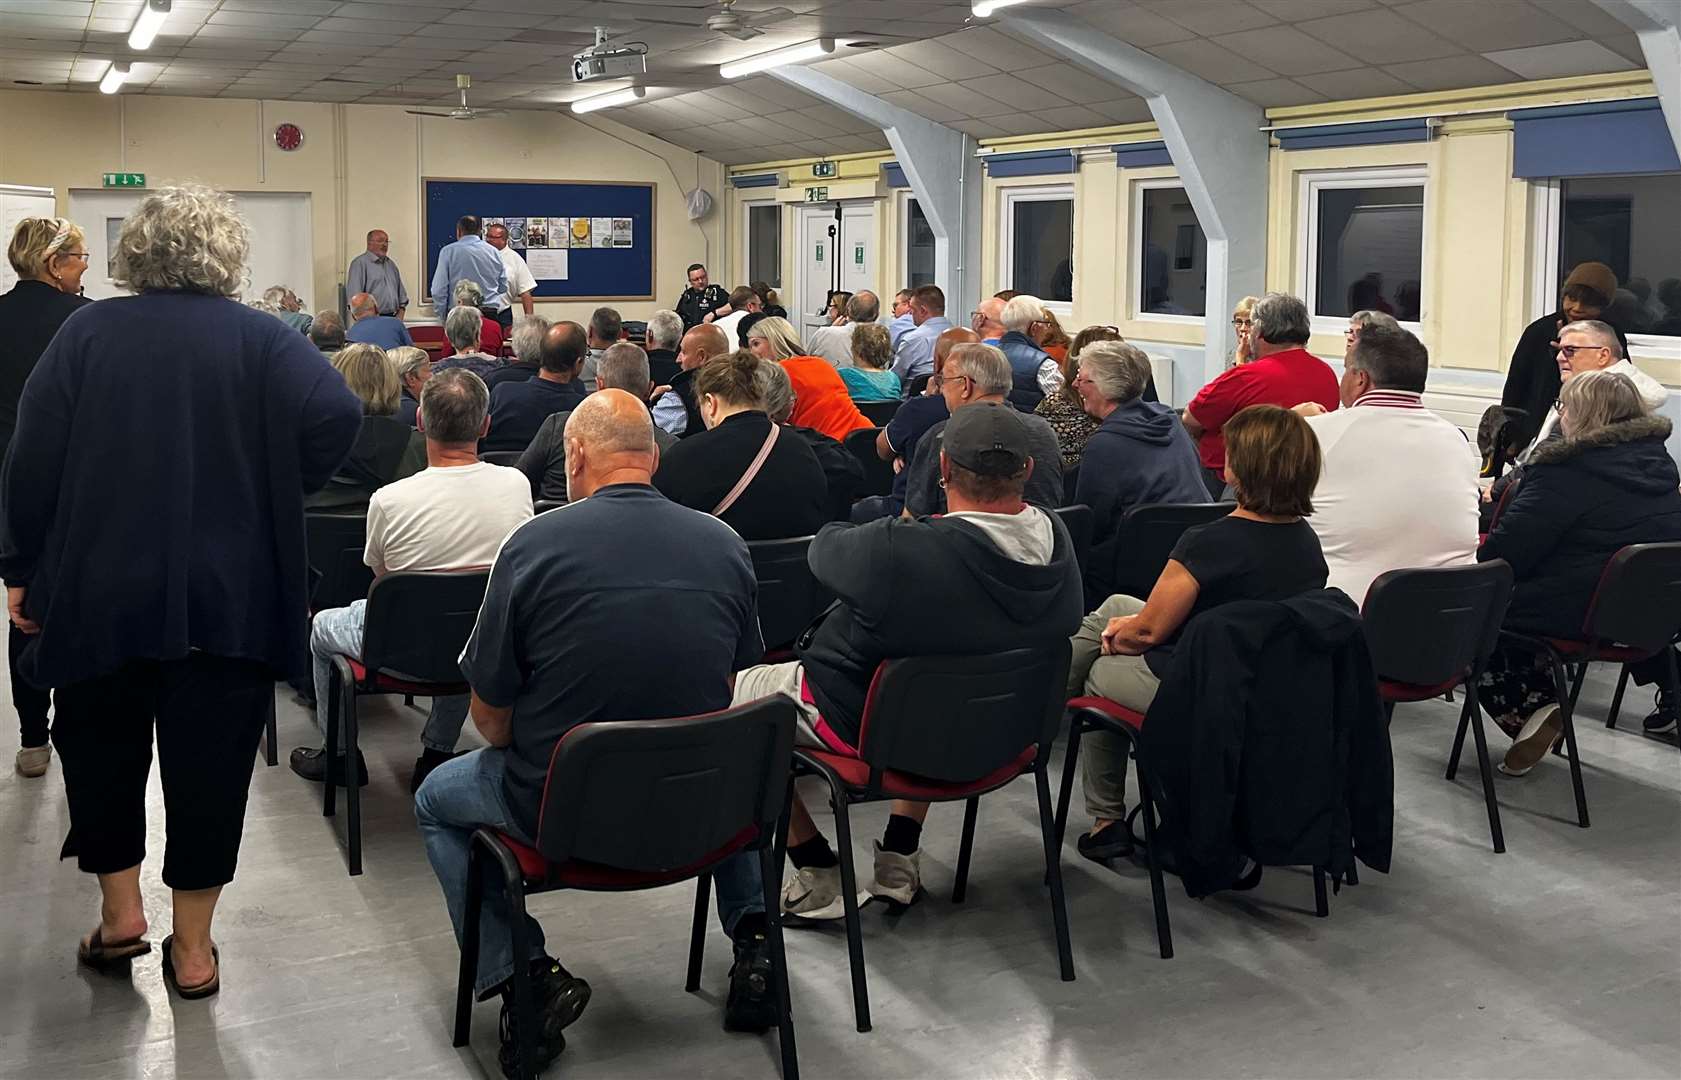 More than 80 residents packed the community hall